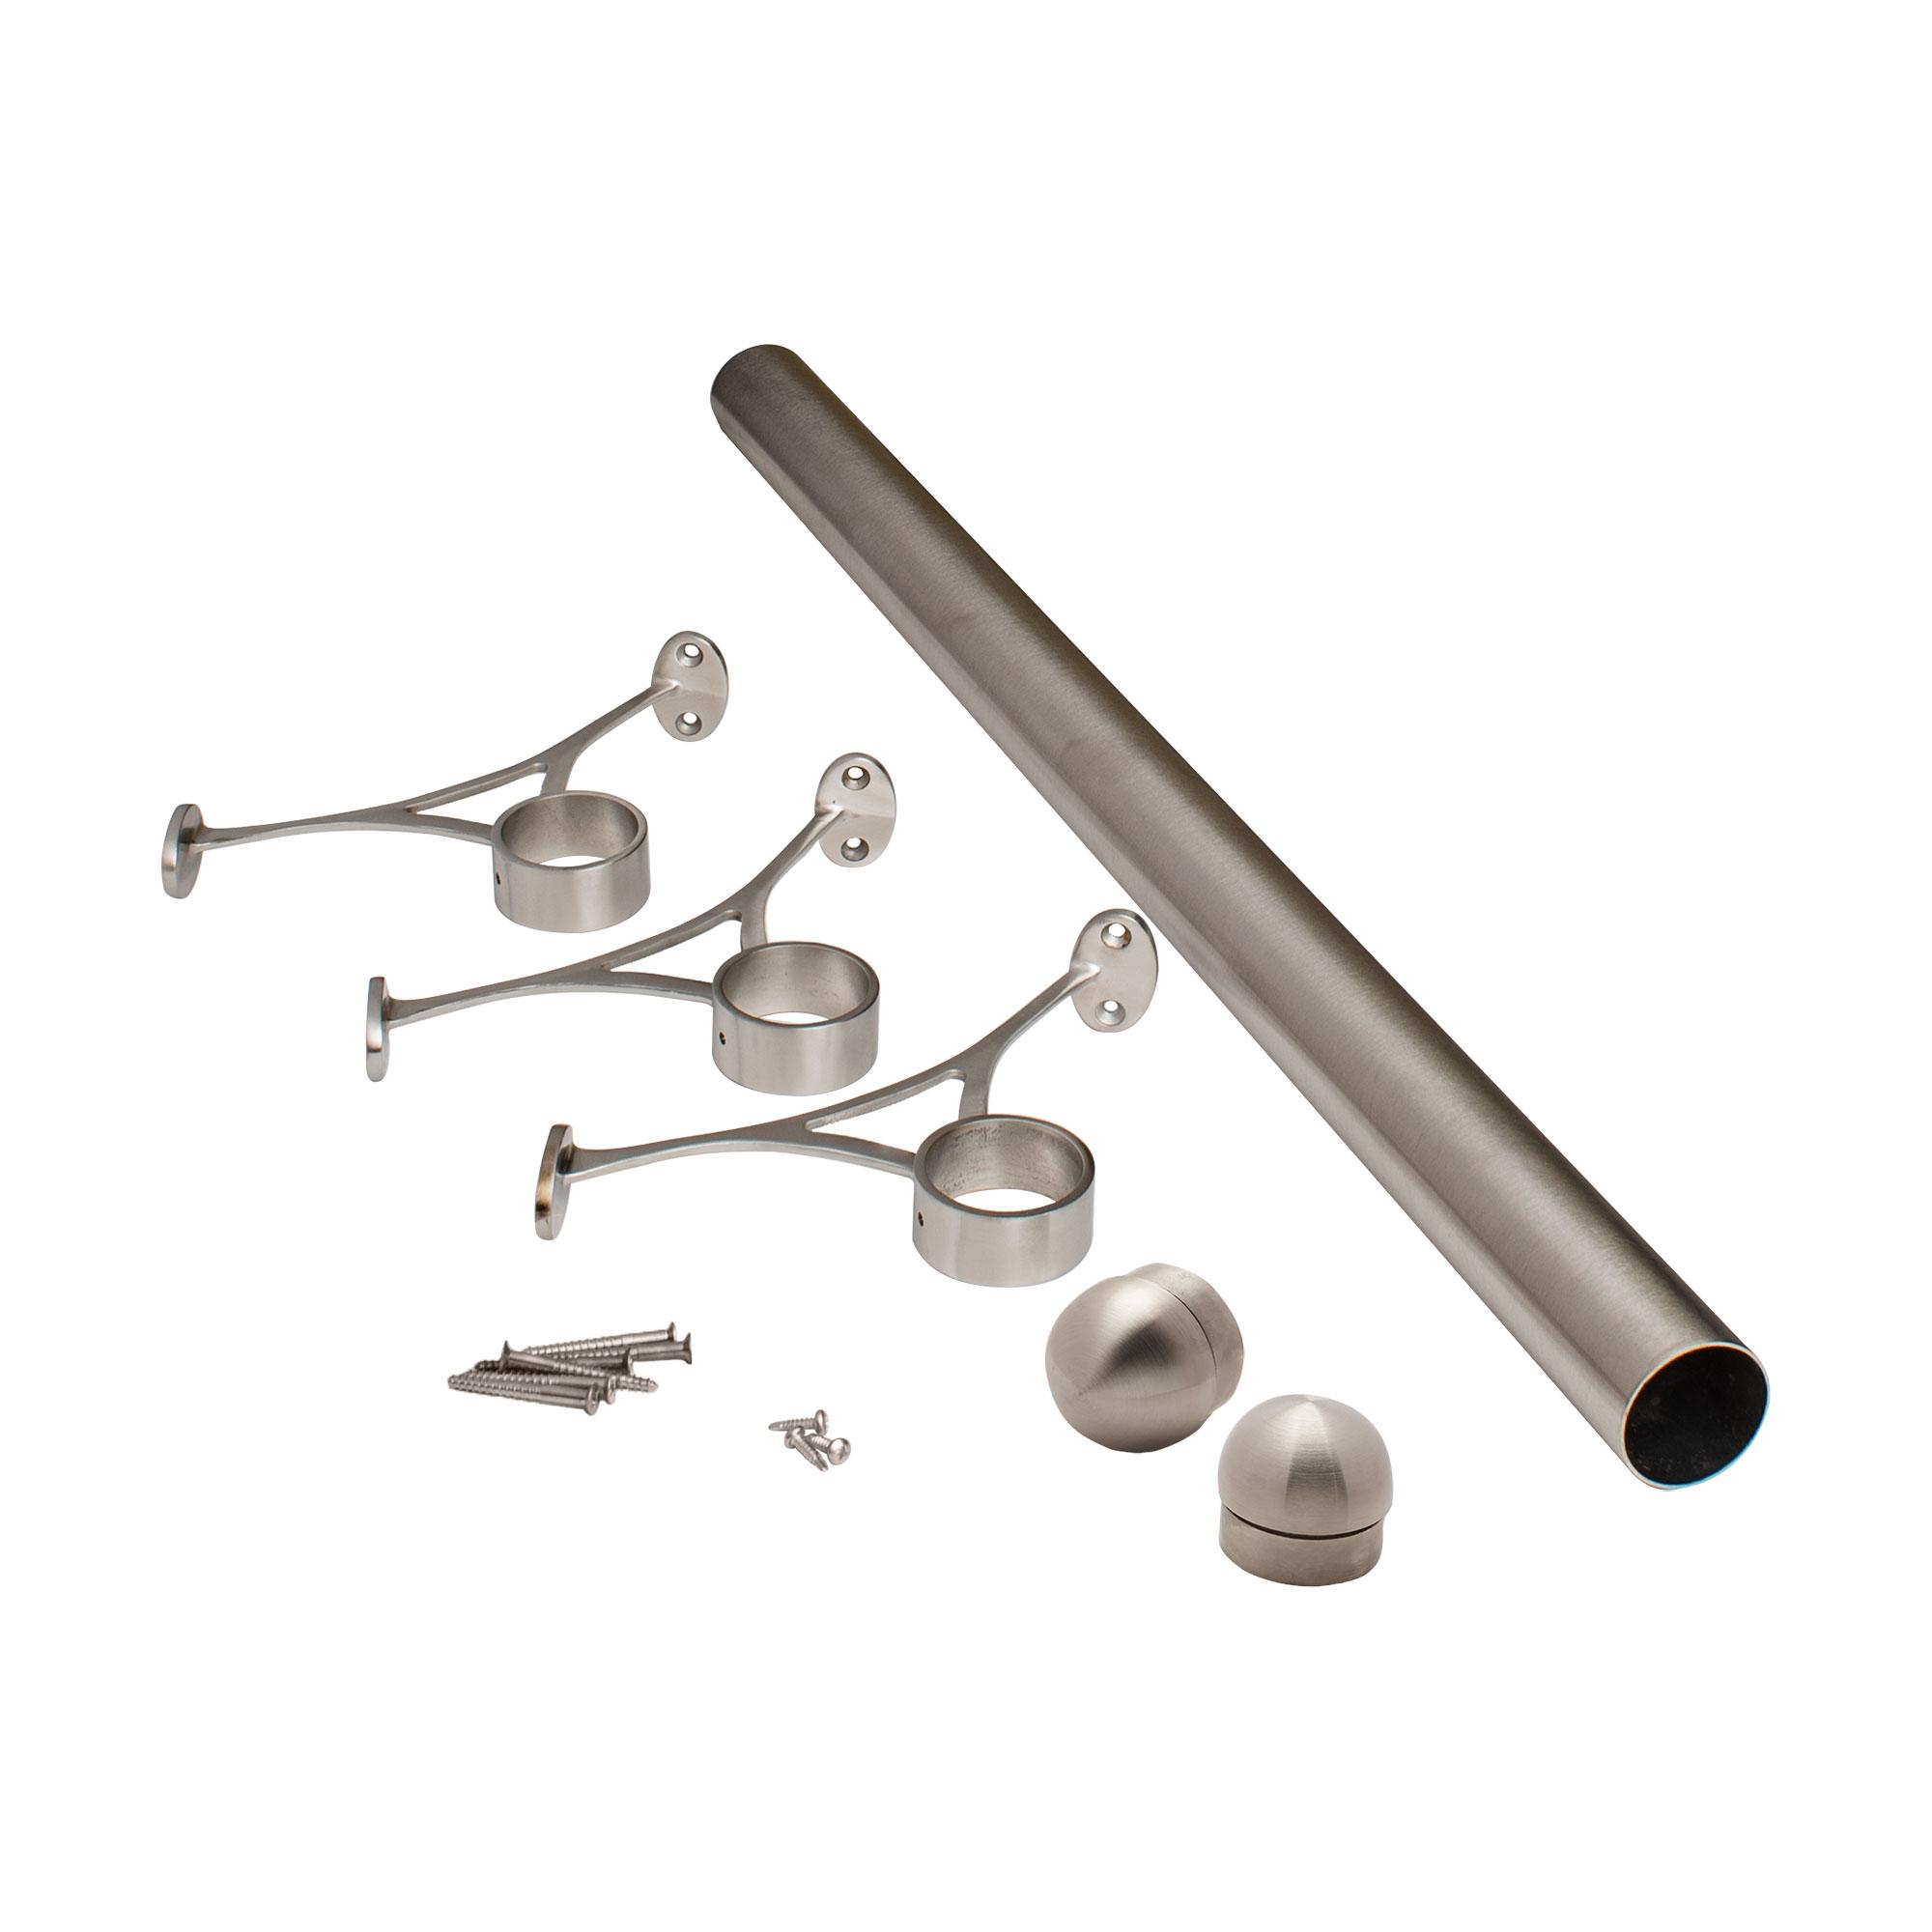 Outwater 6' Bar Foot Rail Kit - Complete Undercounter Mount Hardware and  Tubing, Brass Finish